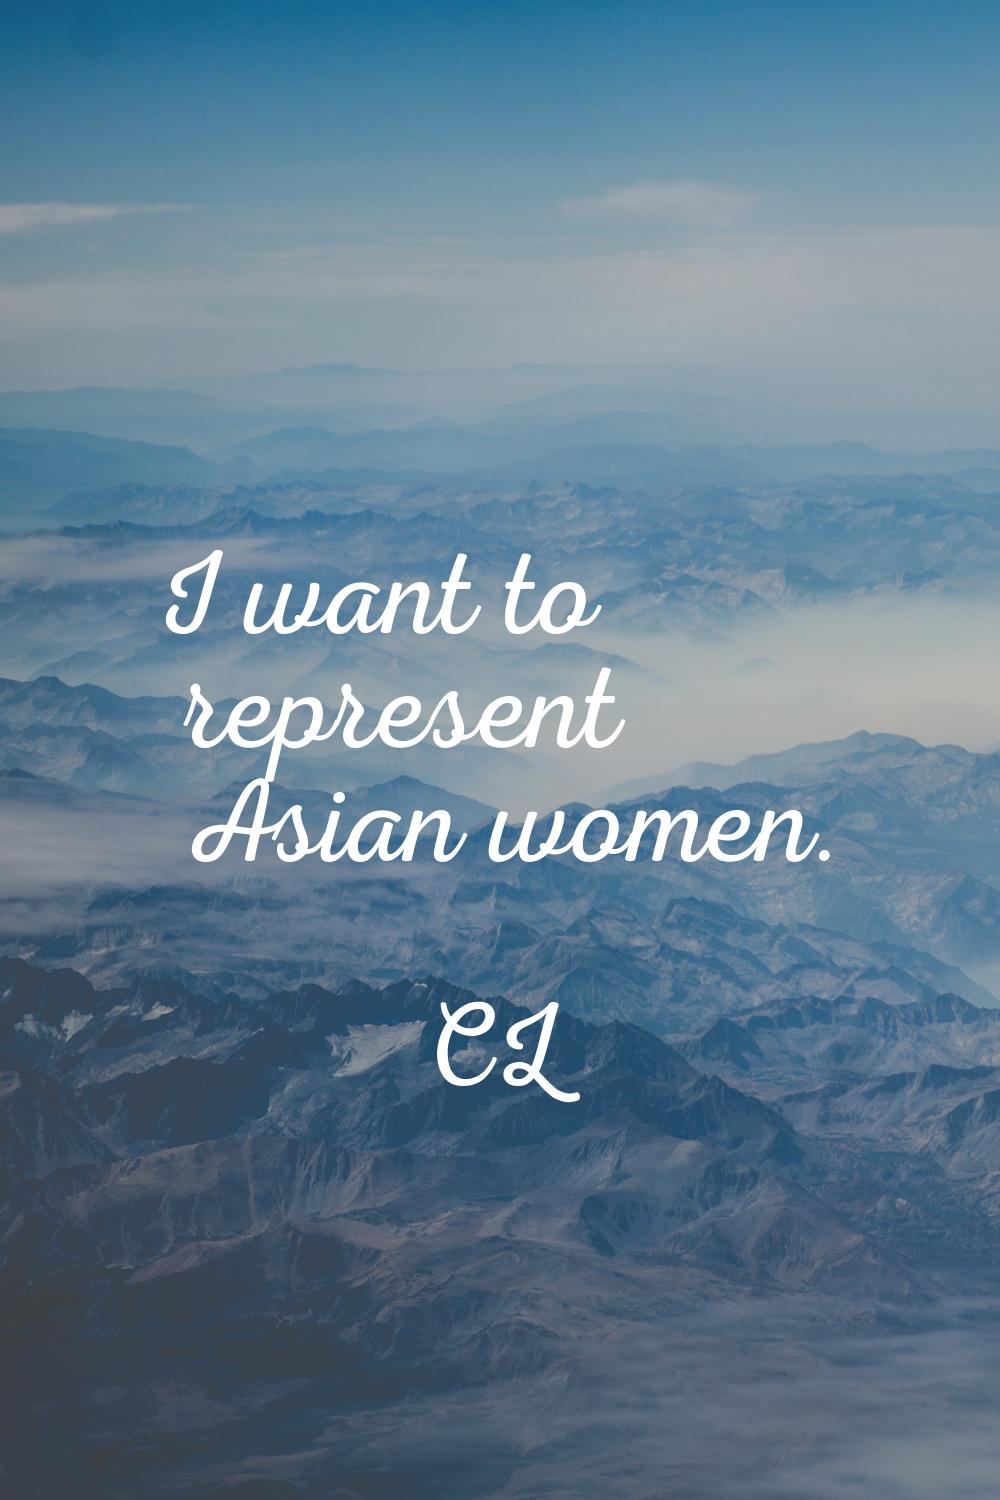 I want to represent Asian women.